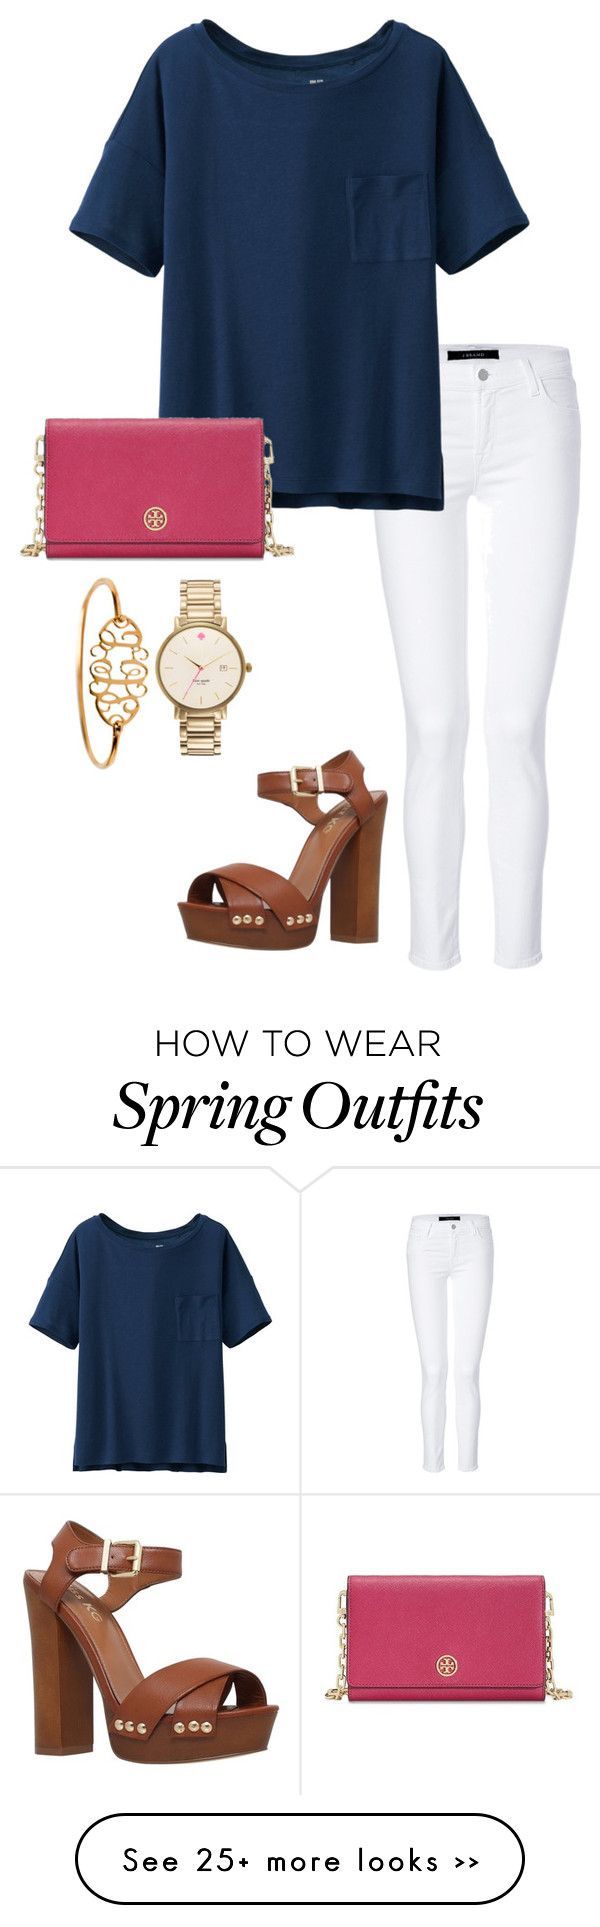 “last of spring outfits” by sarinaalily on Polyvore featuring J Brand, Uniqlo, Tory Burch, Kate Spade and